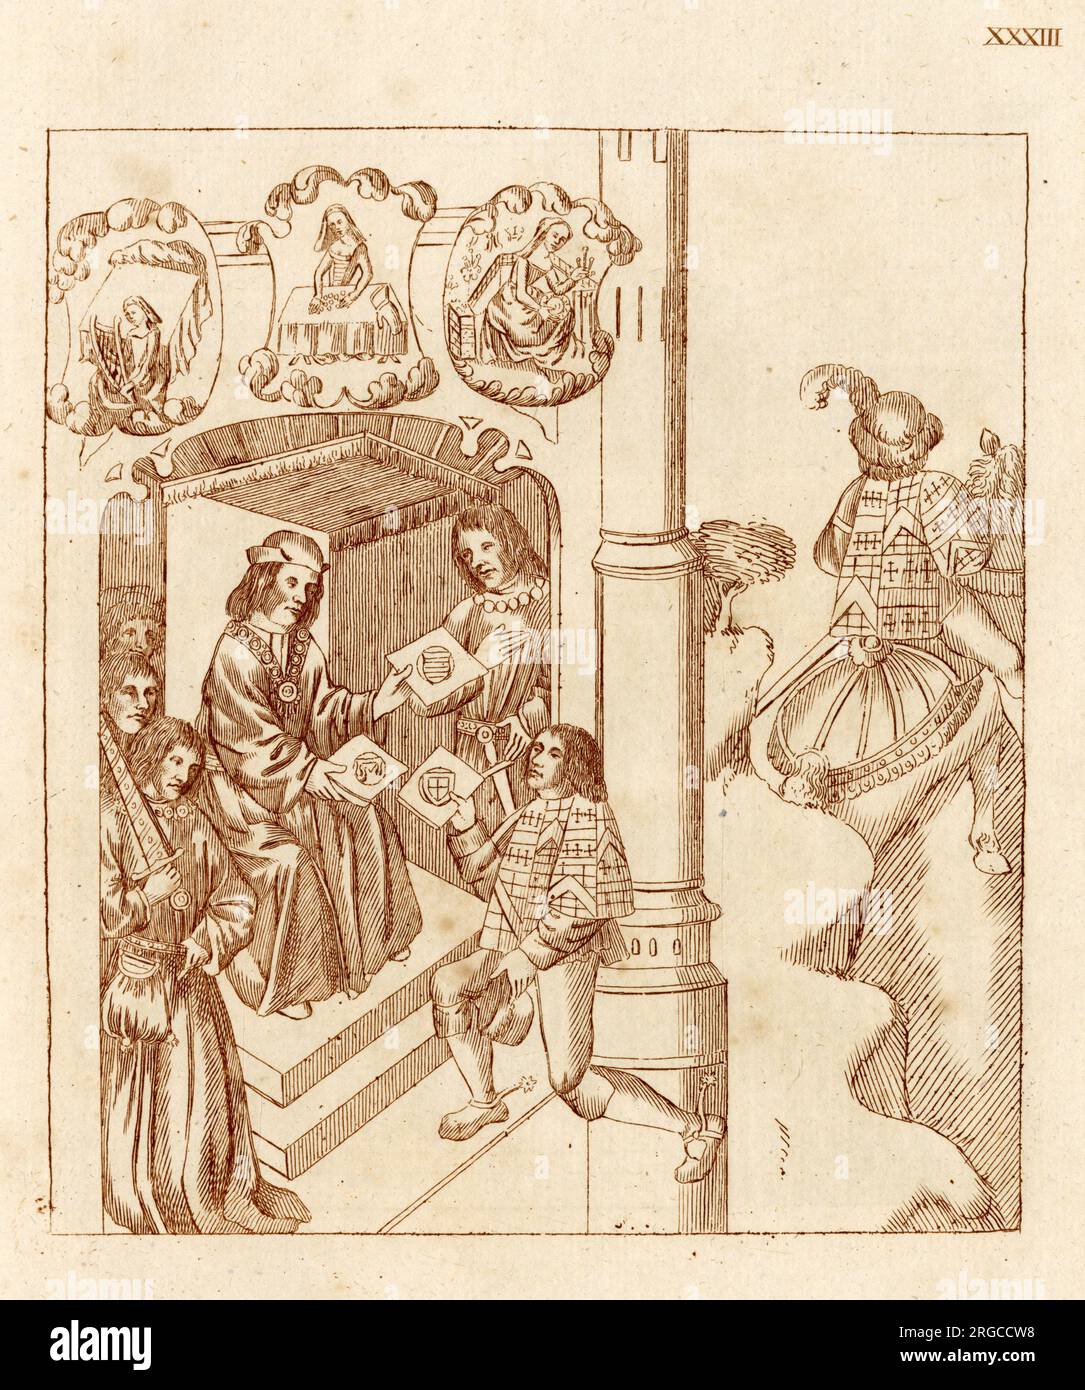 Richard Beauchamp, Earl of Warwick, sends a messenger to the French court bearing letters with an invitation to a joust. Above, three of his pavises, or shields, are shown, each depicting a female figure, one harping, another working pearls, and a third making a chapelet. Stock Photo